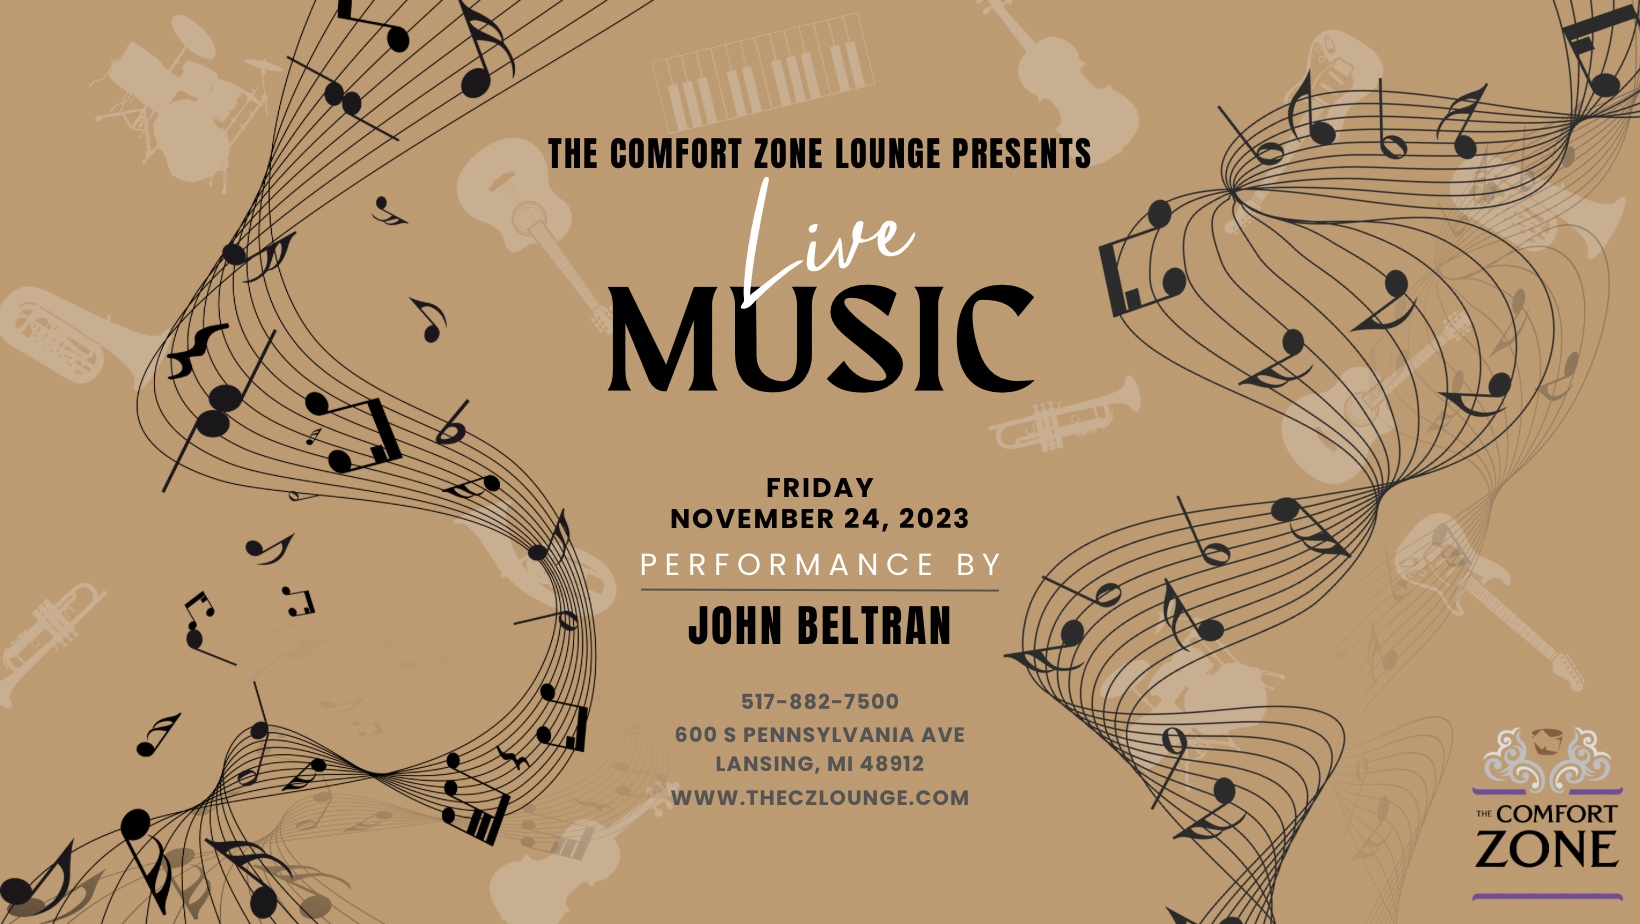 Live music on Friday, November 24 with a performance by John Beltran.